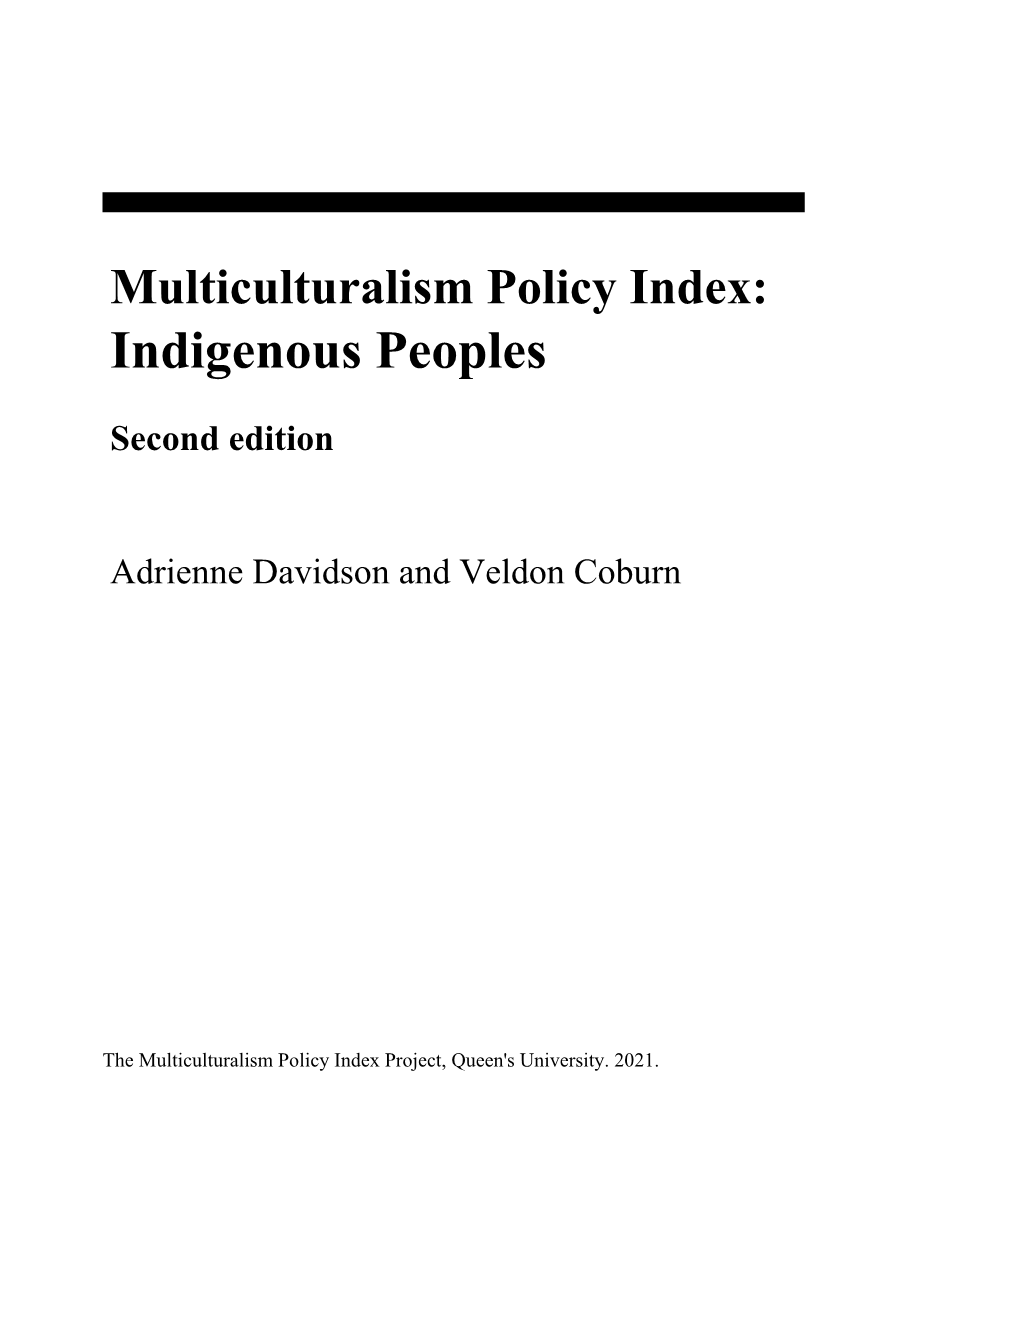 Multiculturalism Policy Index: Indigenous Peoples